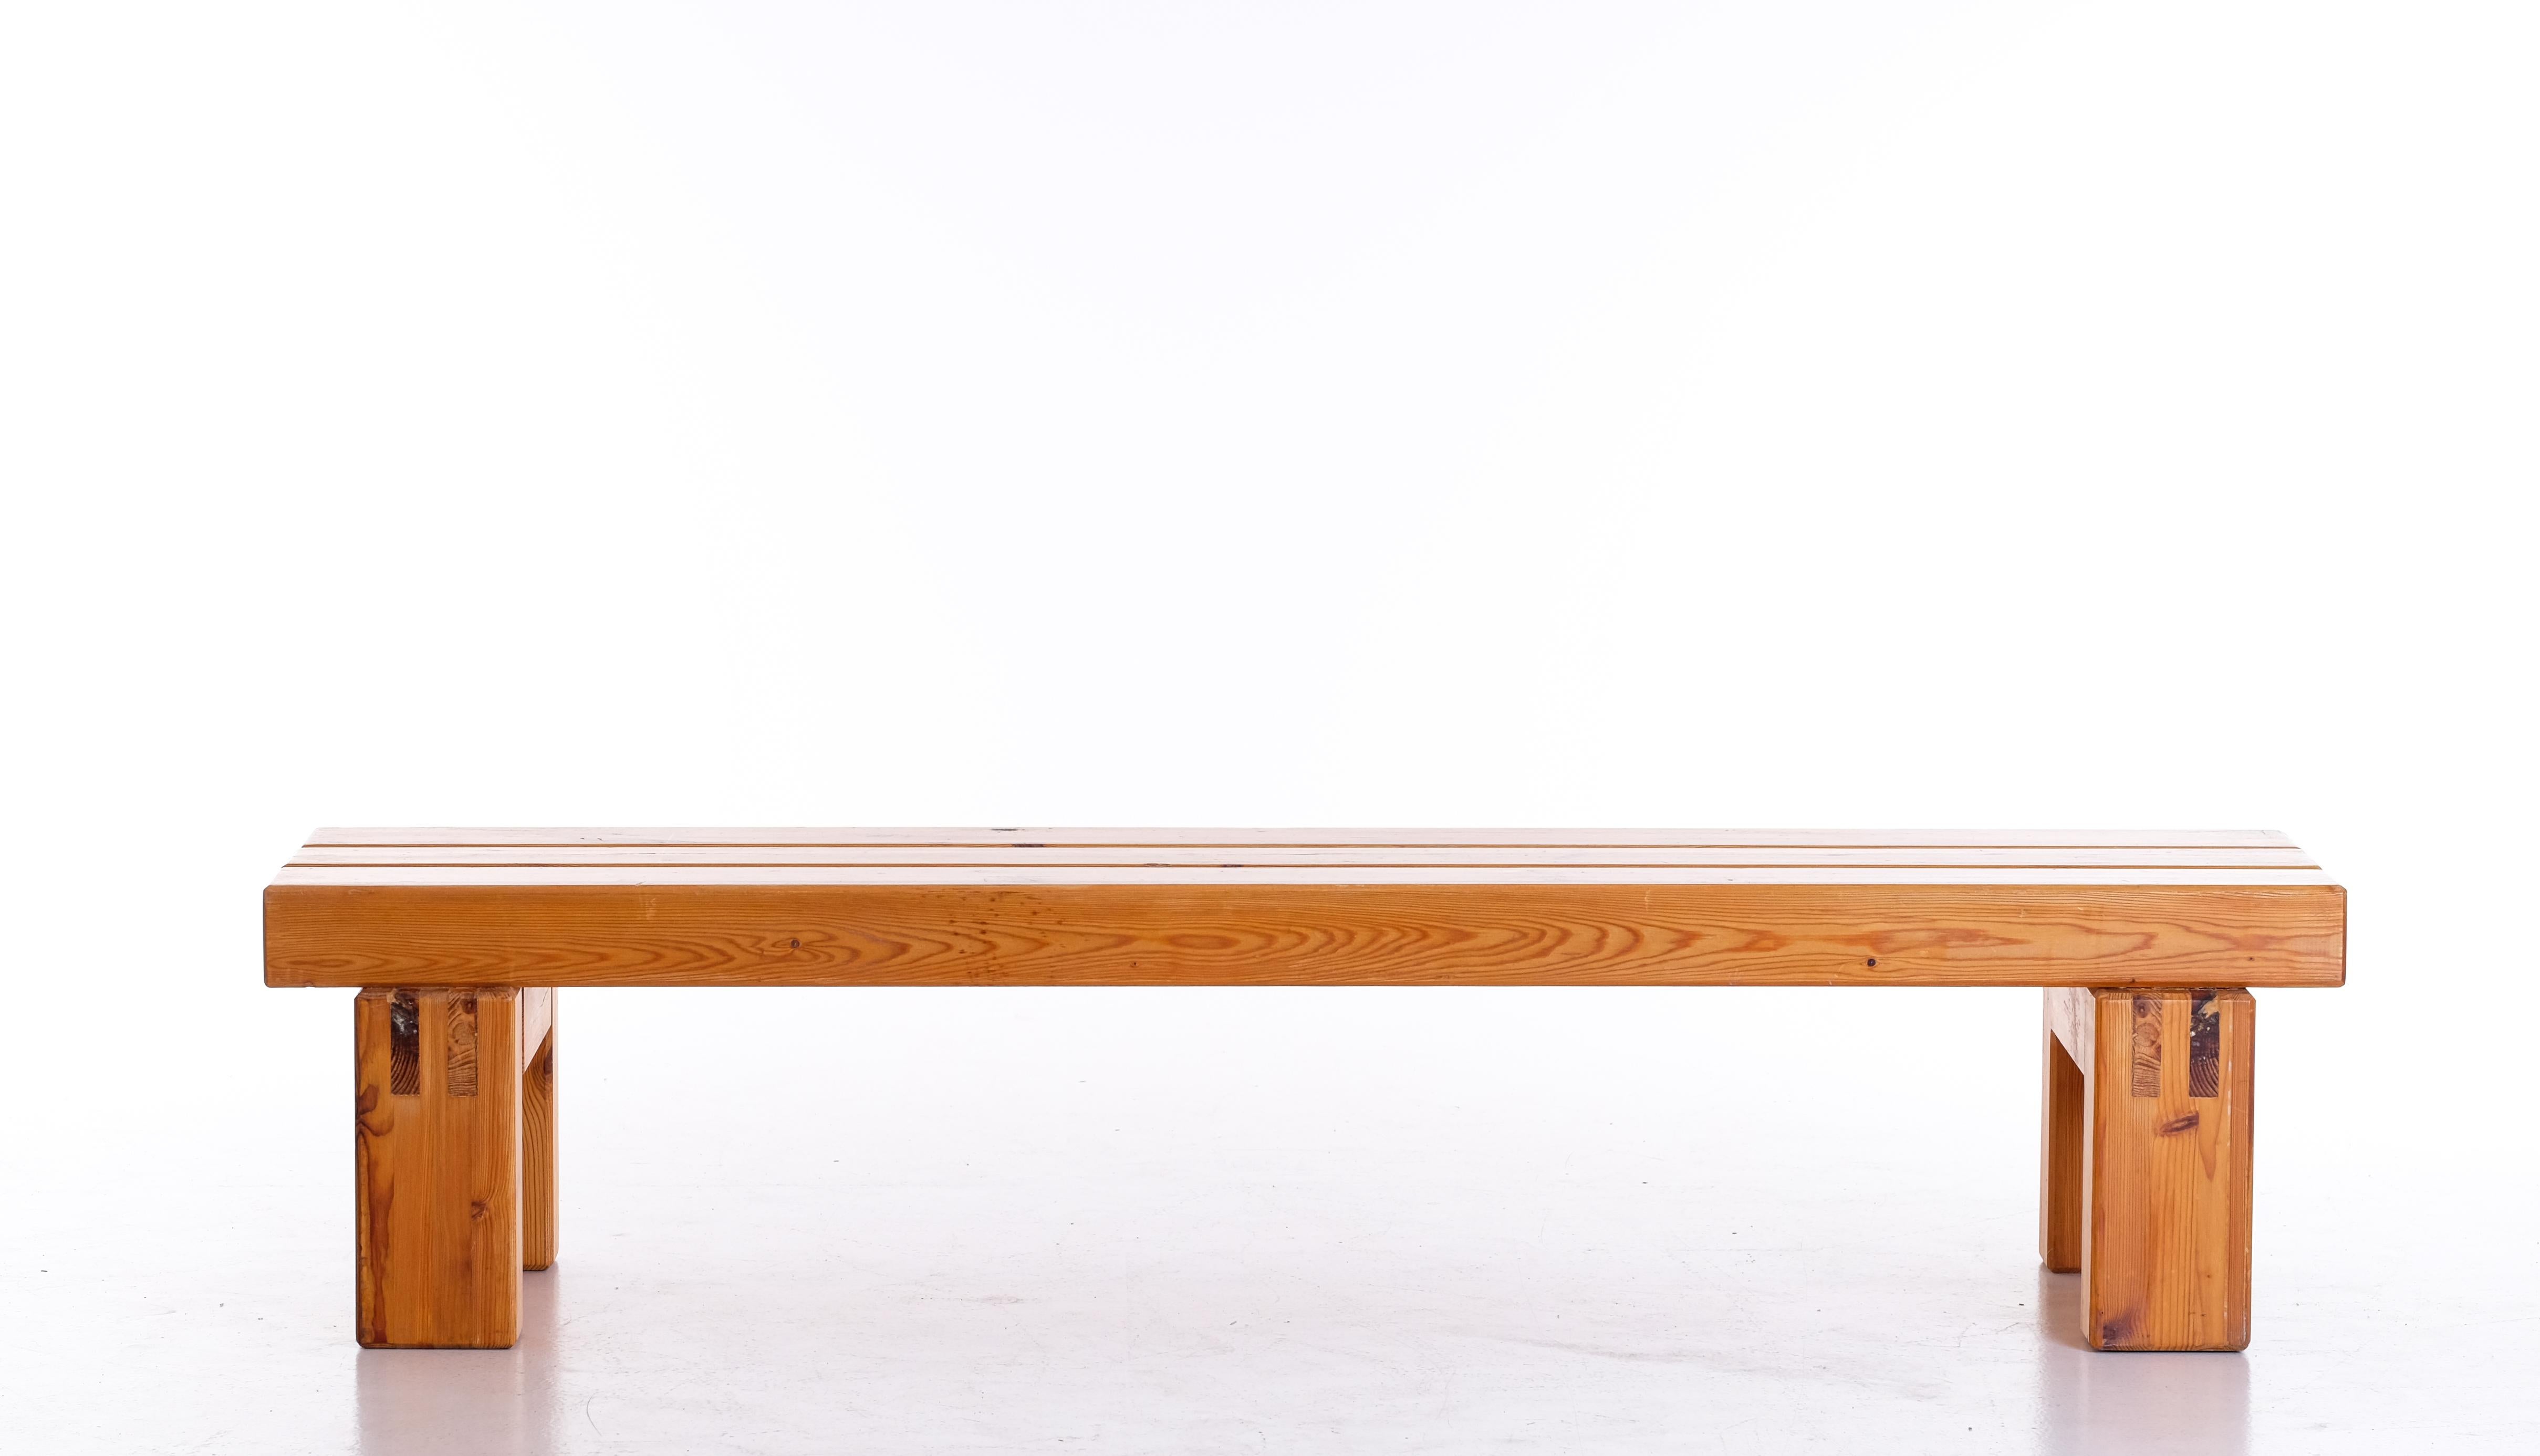 Solid pine bench produced in Sweden, 1970s.
Width: 180 cm